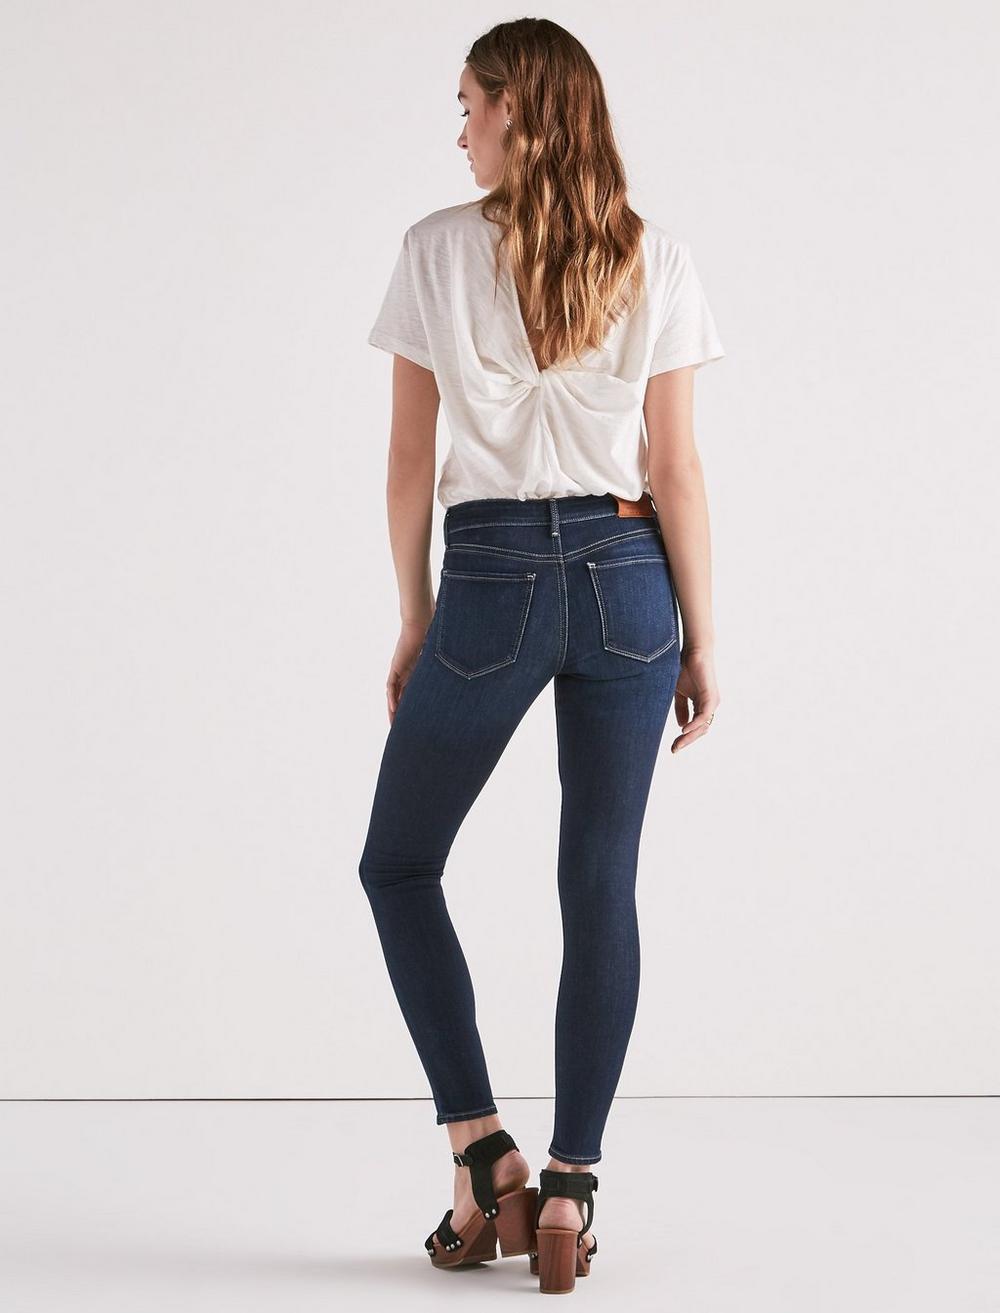 AVA MID RISE SKINNY JEAN IN IMMORTAL | Lucky Brand